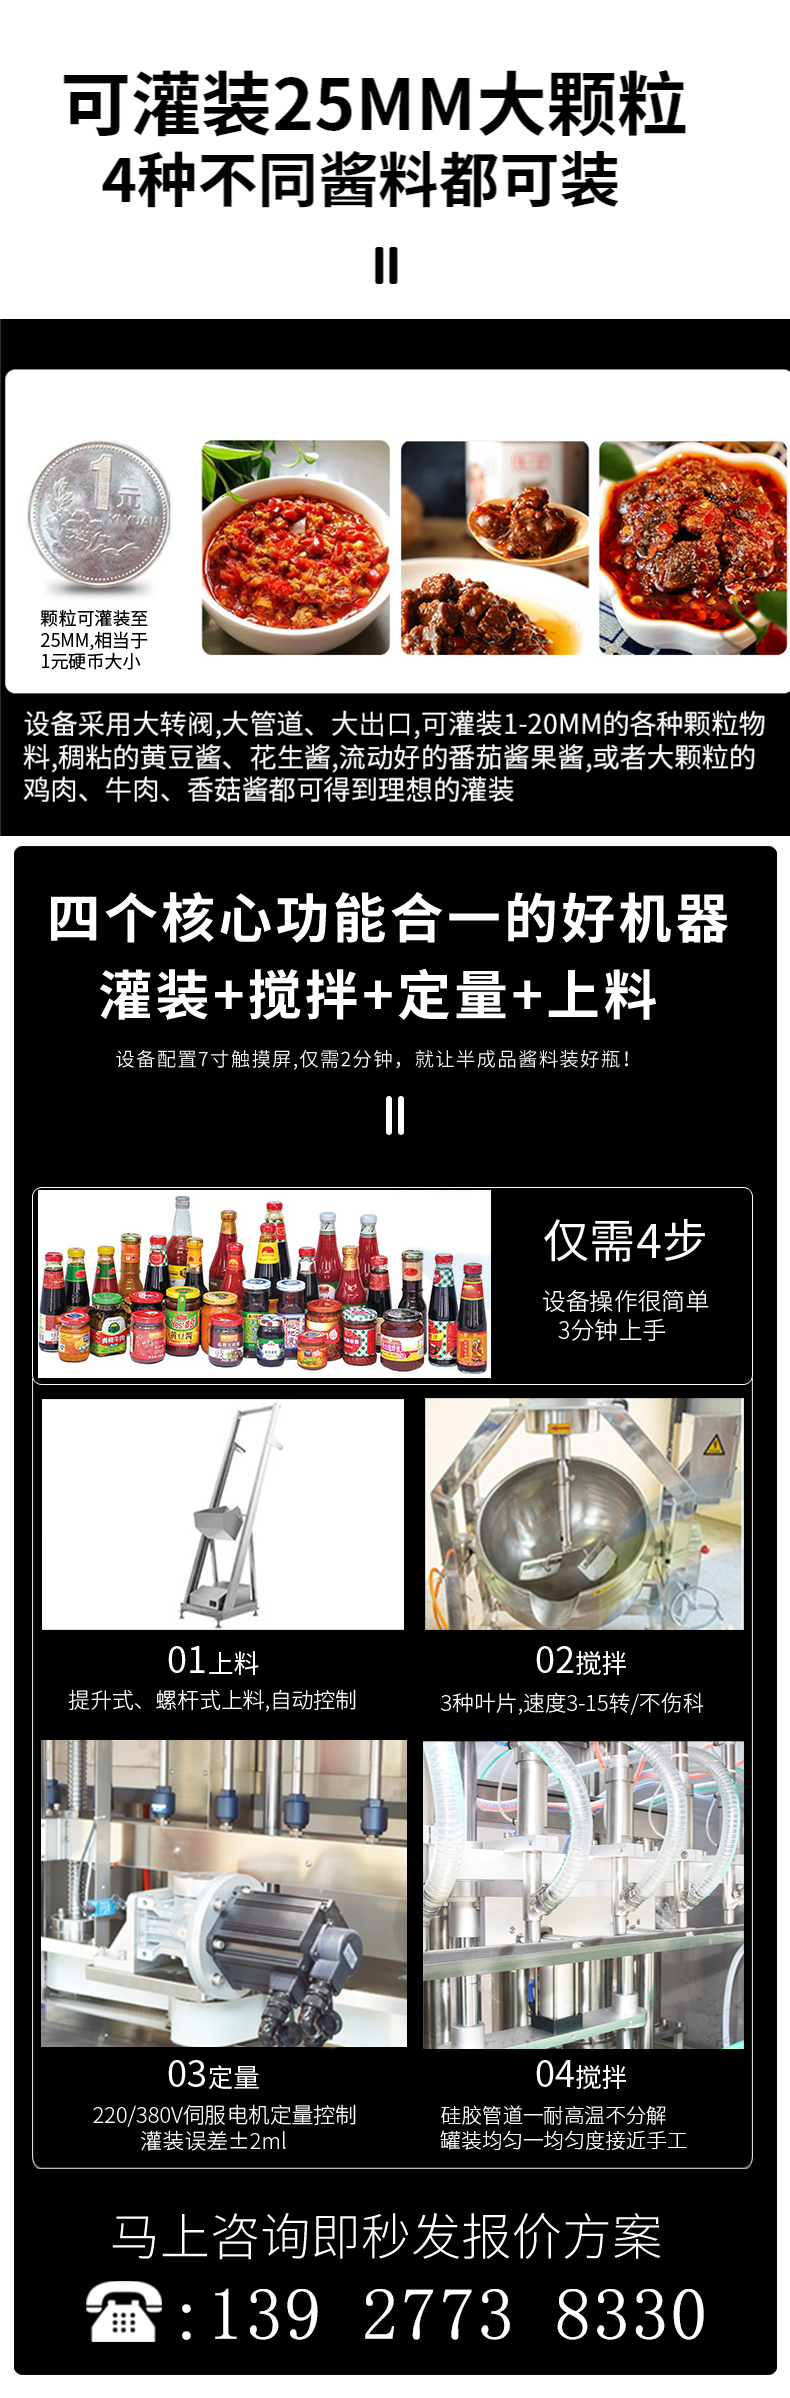 Complete set of equipment for chili sauce Automatic pickling and filling production line Chopping chili sauce processing machinery